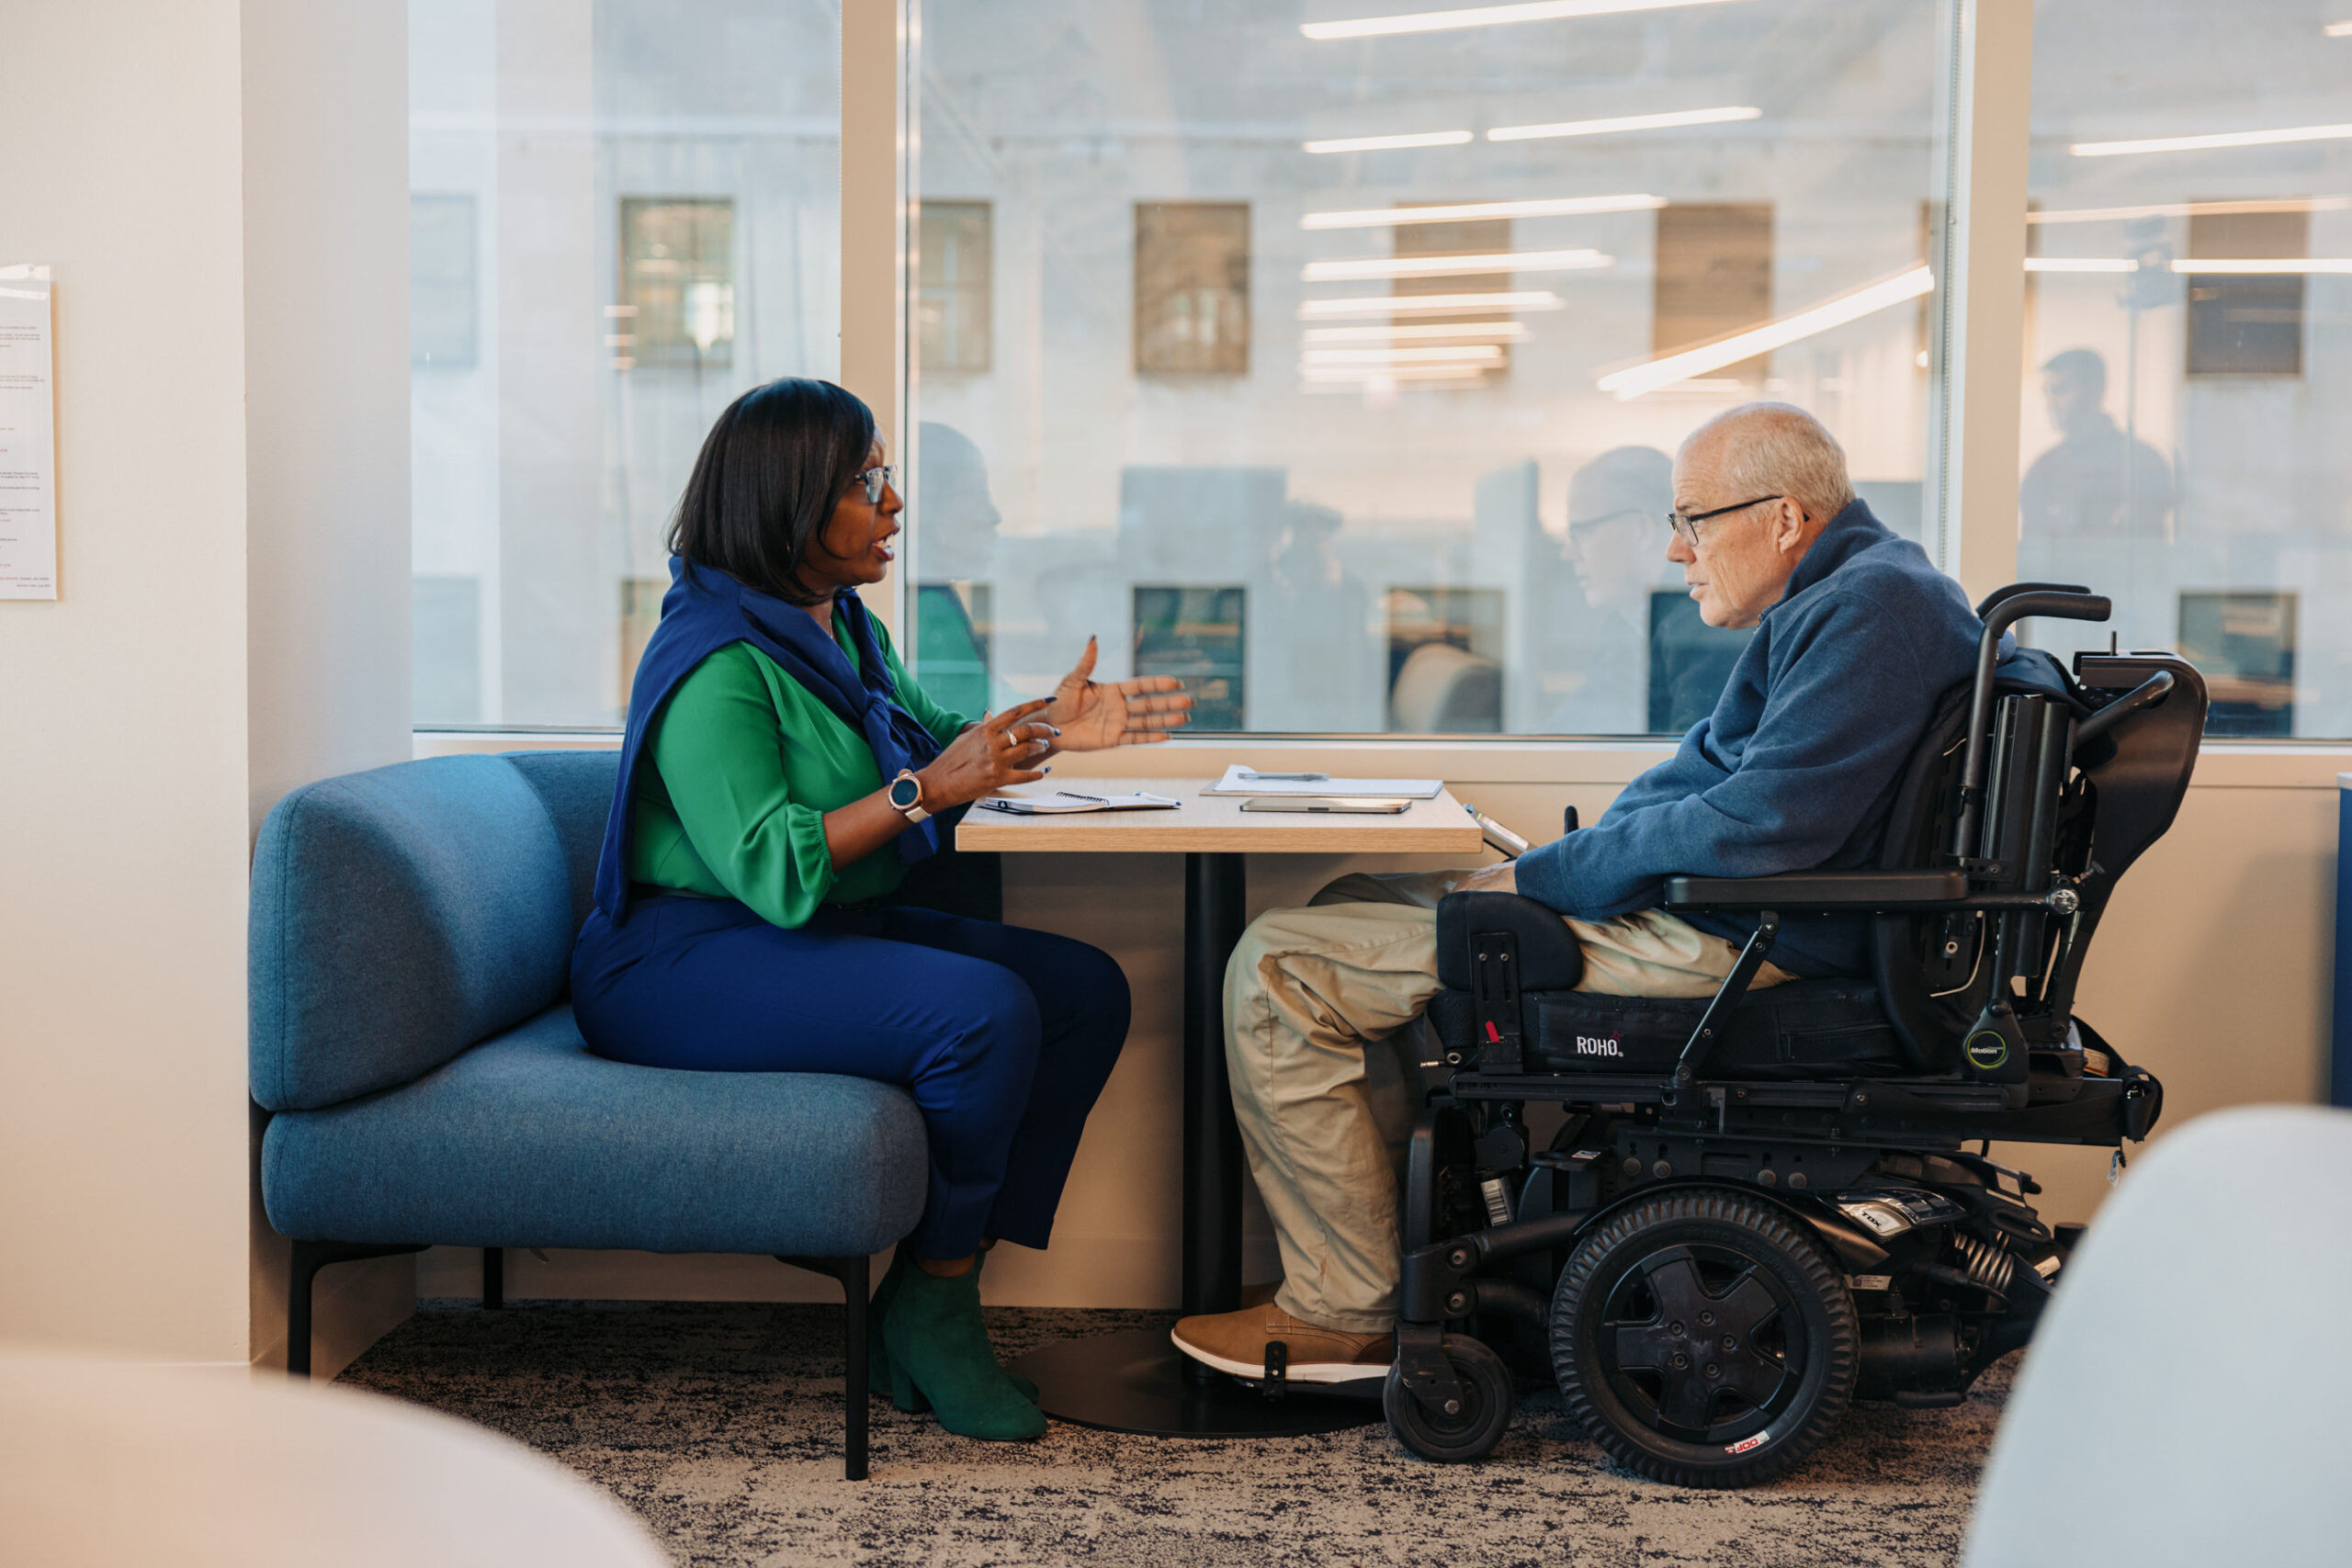 Two colleagues sit across from one another in a meeting. One uses a power wheelchair.